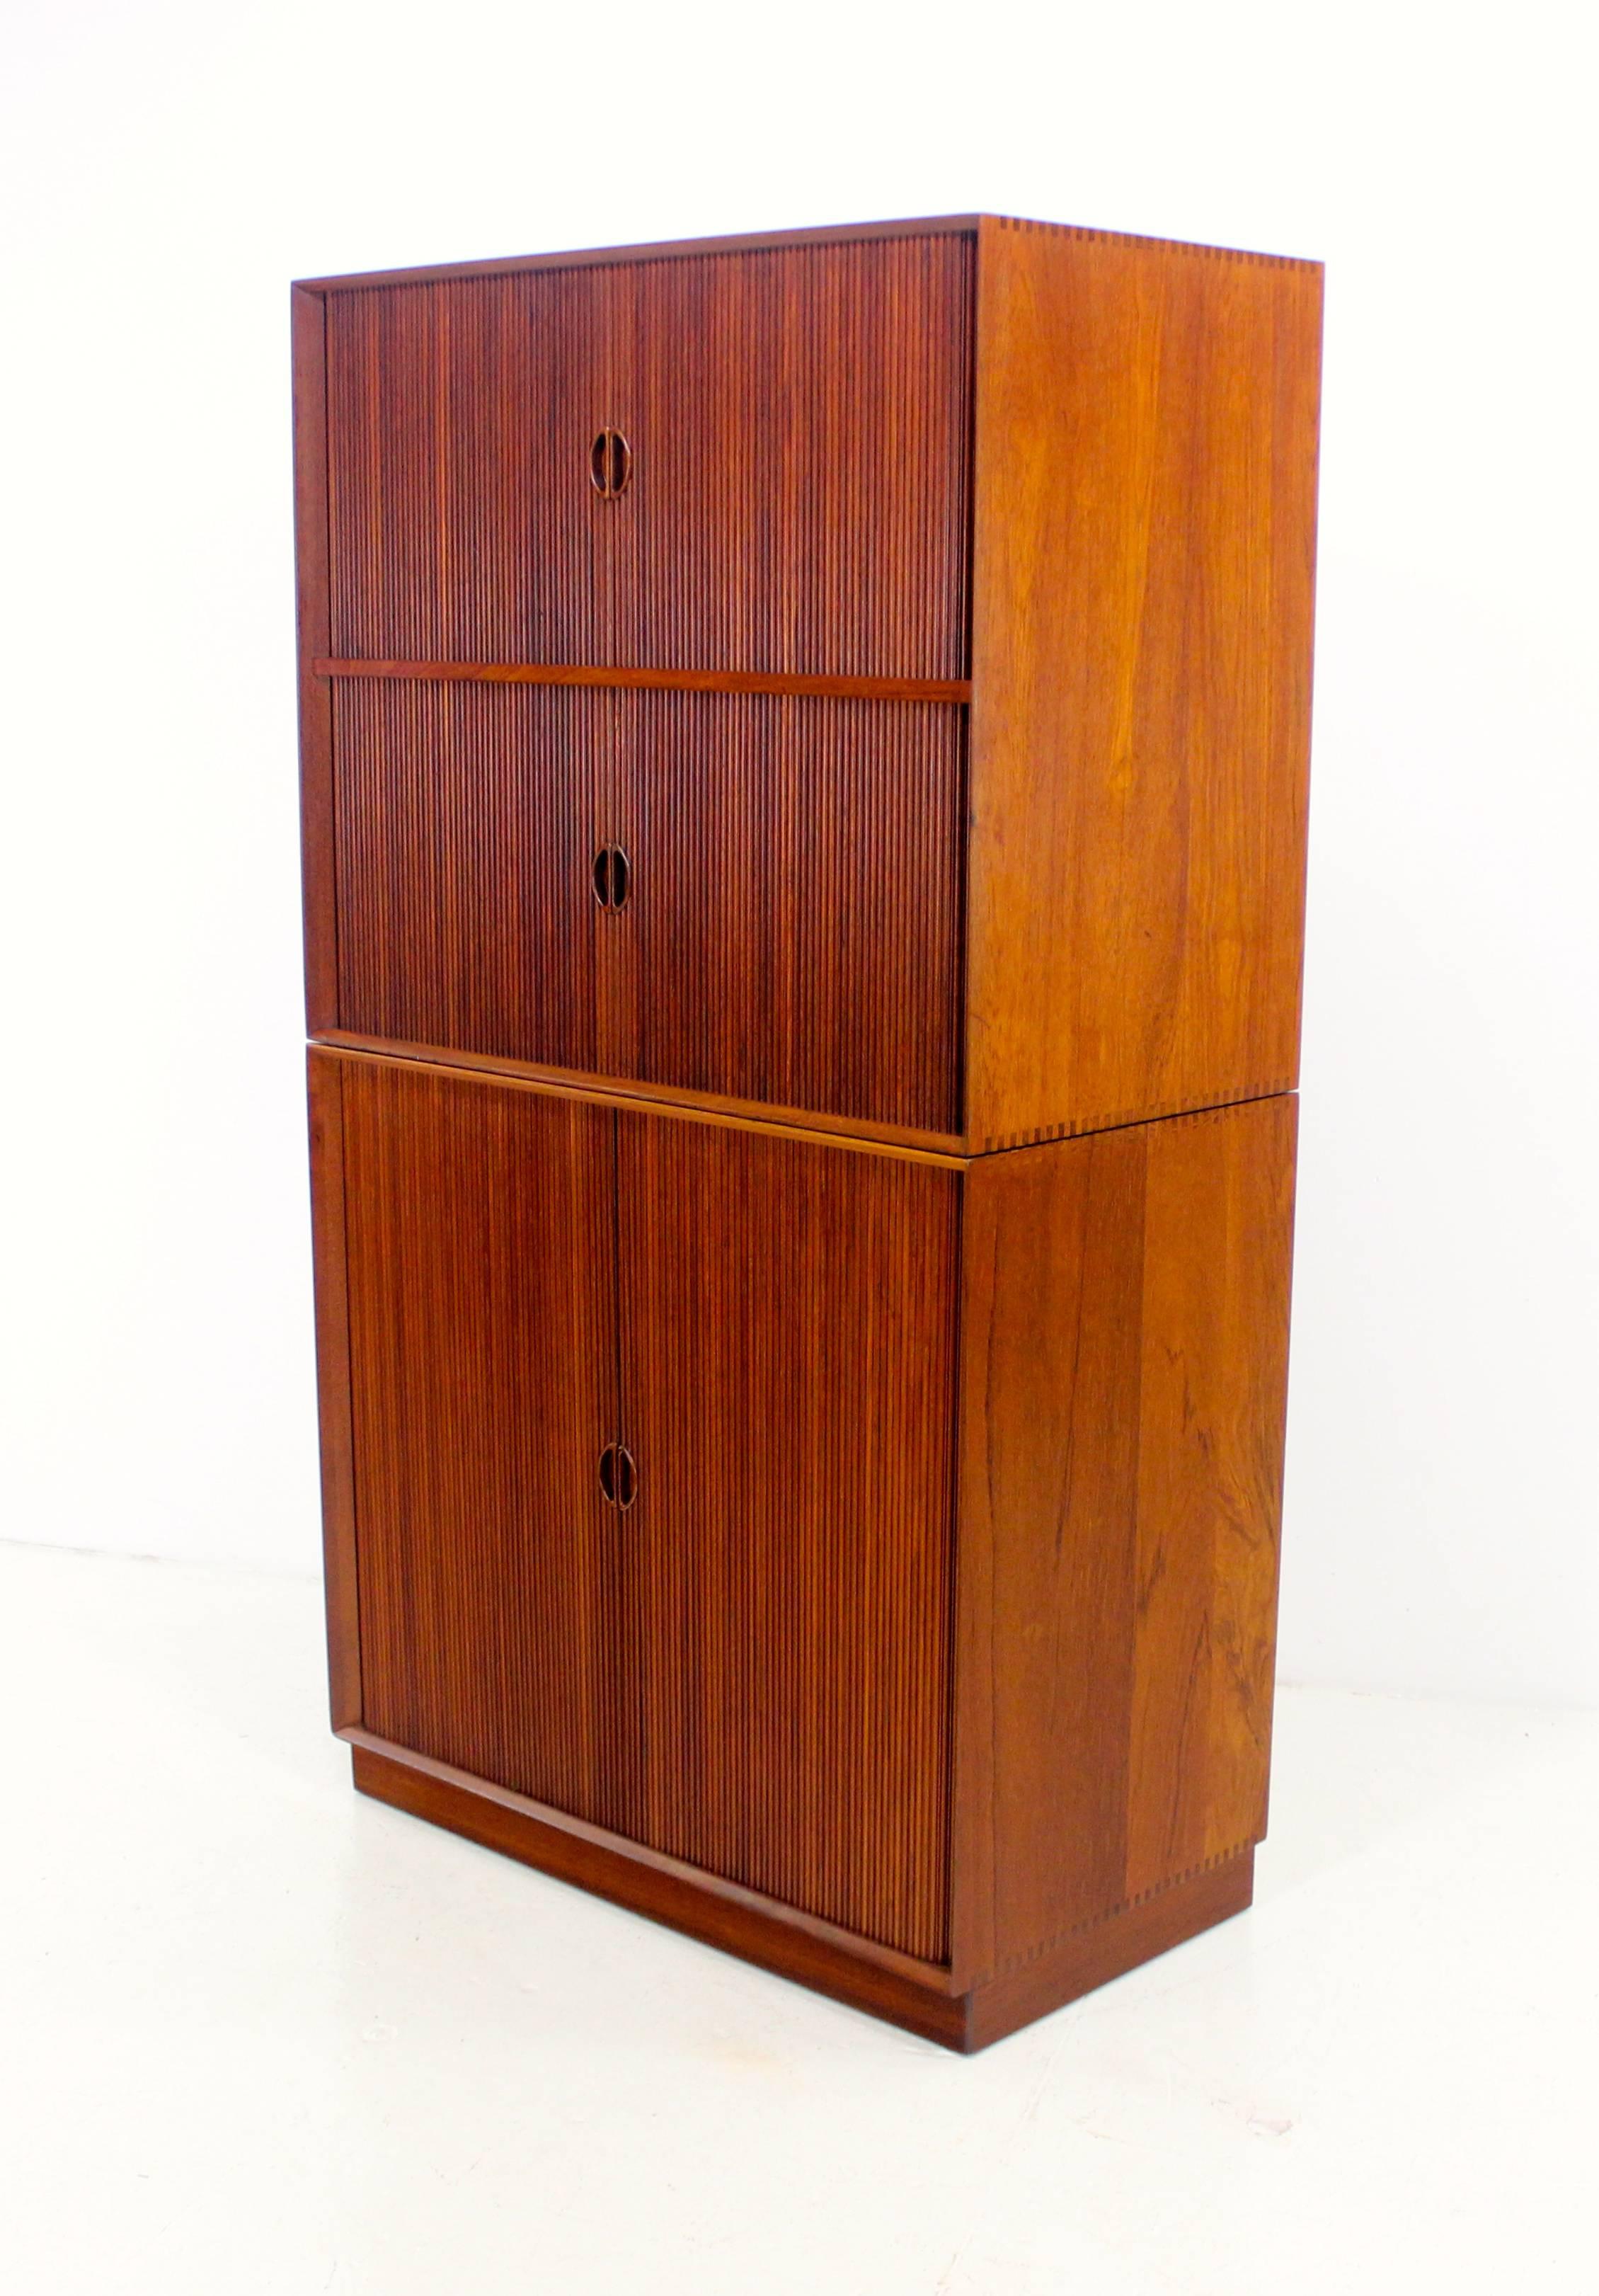 Danish modern, two part, stacking cabinet designed by Peter Hvidt.
Solid teak.
Two tambour doors on top open to storage.
One tambour door on the bottom opens to adjustable shelves.
Features signature Hvidt superior craftsmanship and